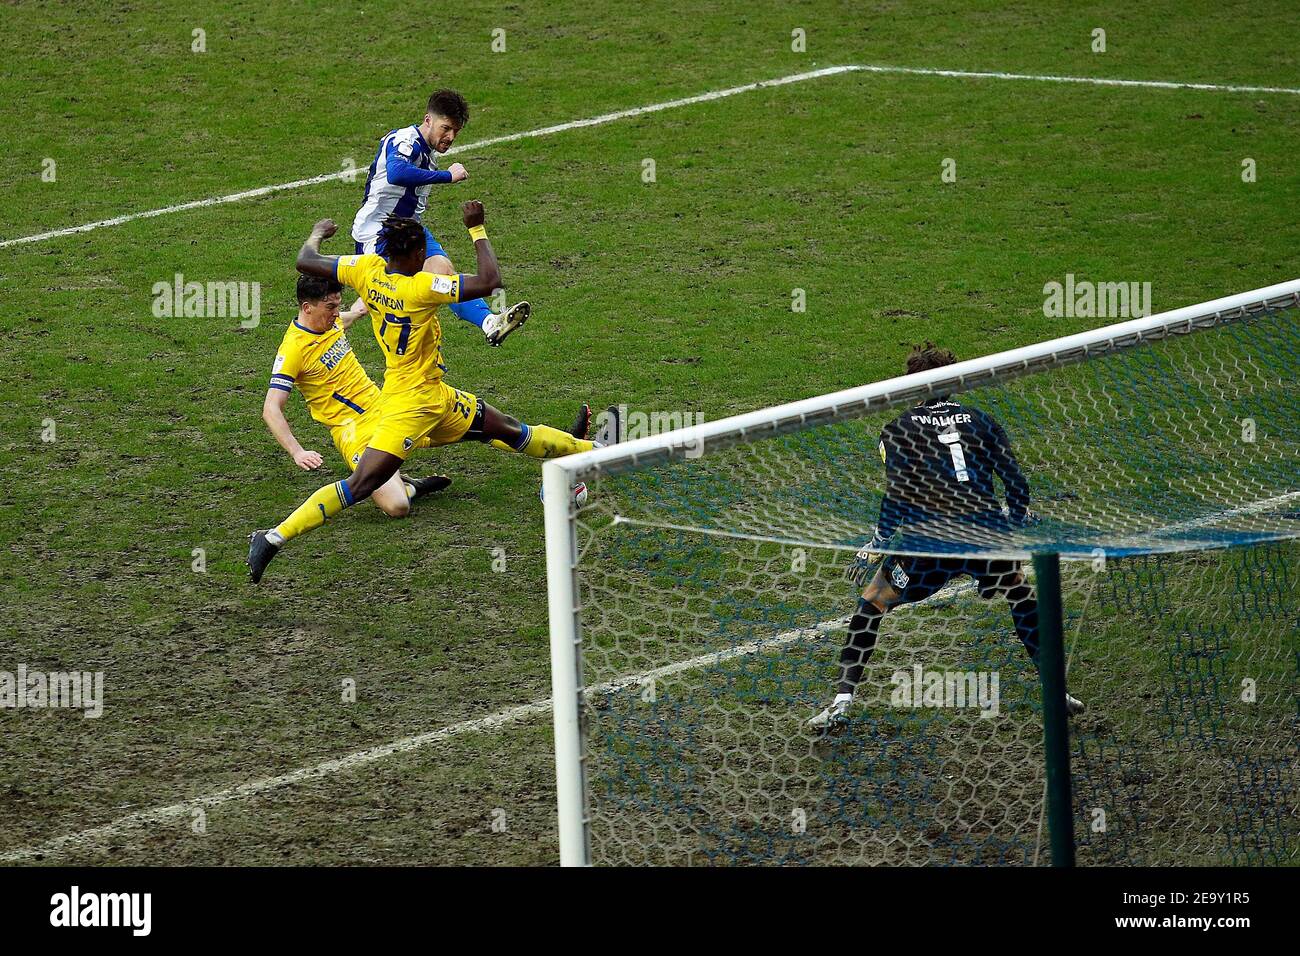 WIGAN, ENGLAND. FEB 6TH: Wigans Jamie Proctor shoots and scores to make it 2-2 during the Sky Bet League 1 match between Wigan Athletic and AFC Wimbledon at the DW Stadium, Wigan on Saturday 6th February 2021. (Credit: Chris Donnelly | MI News) Credit: MI News & Sport /Alamy Live News Stock Photo